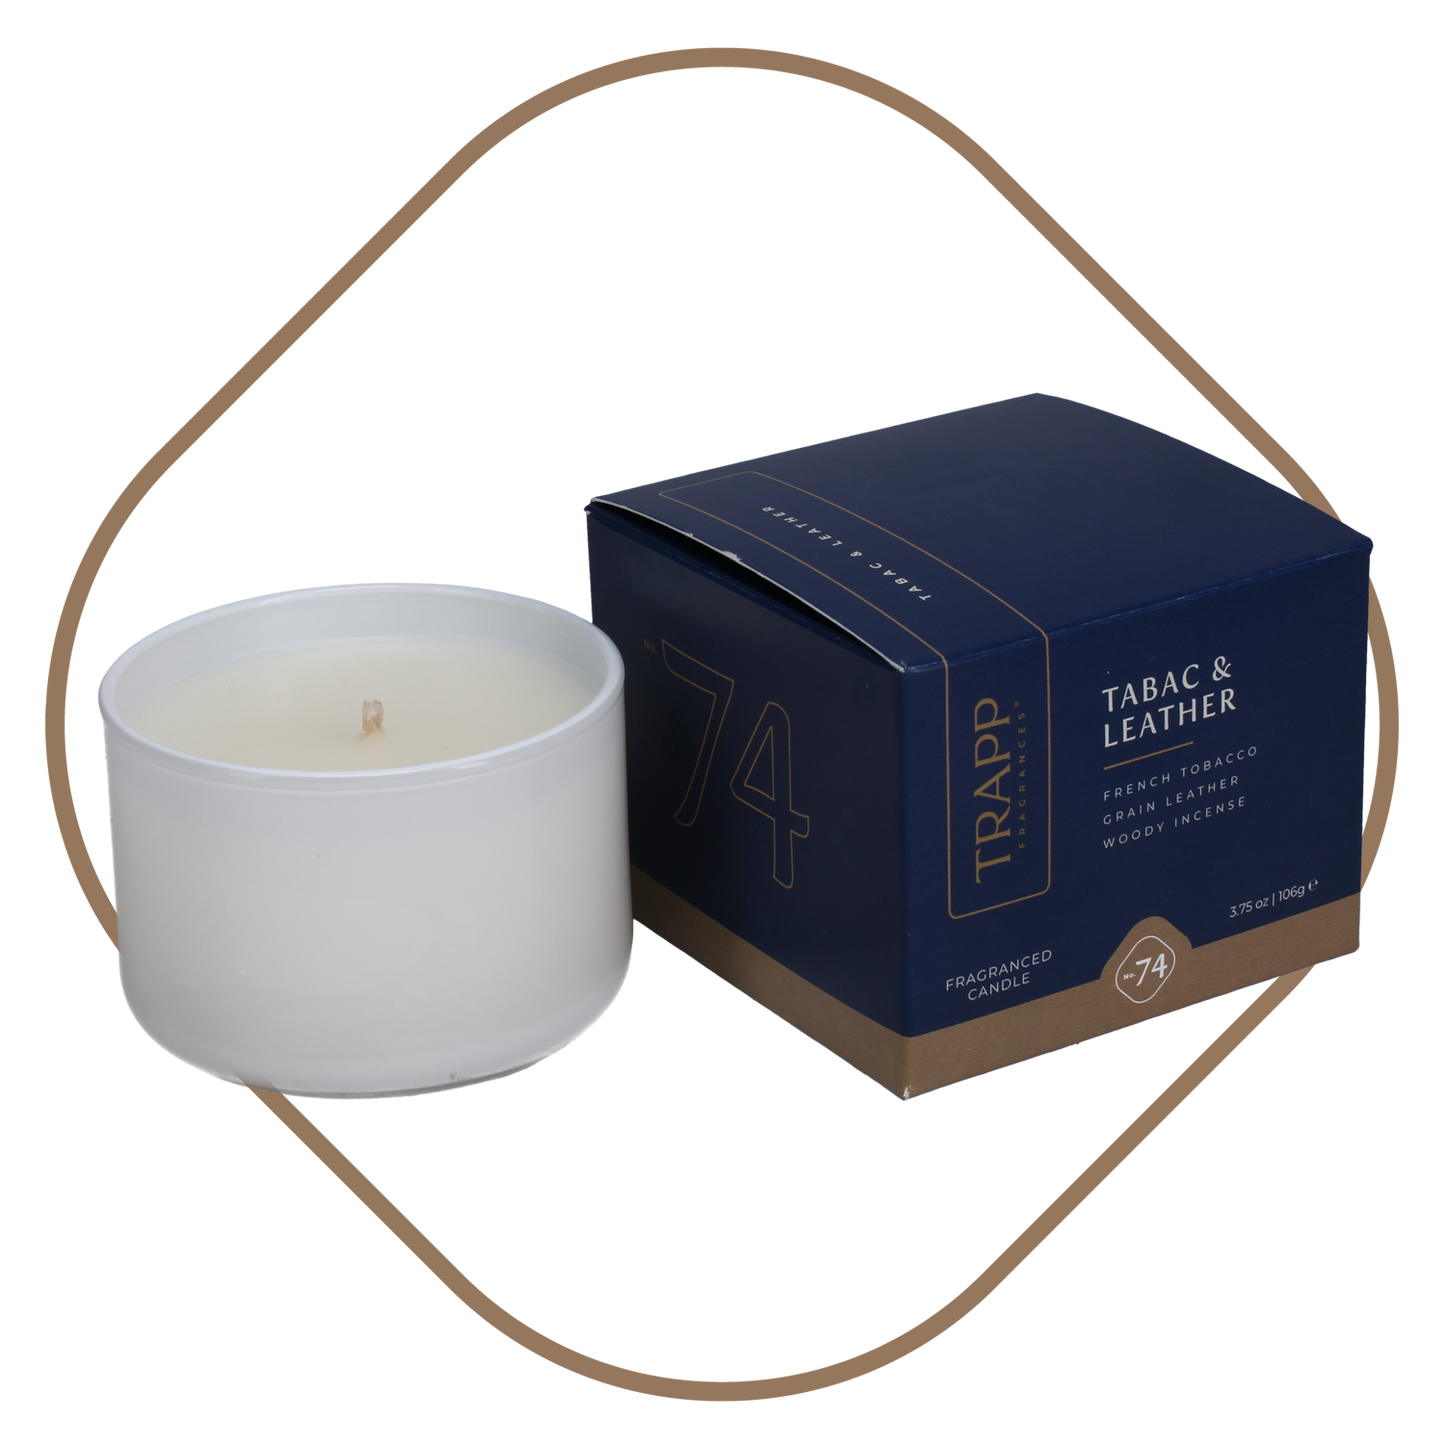 No. 74 Tabac & Leather 3.75 oz. Small Poured Candle